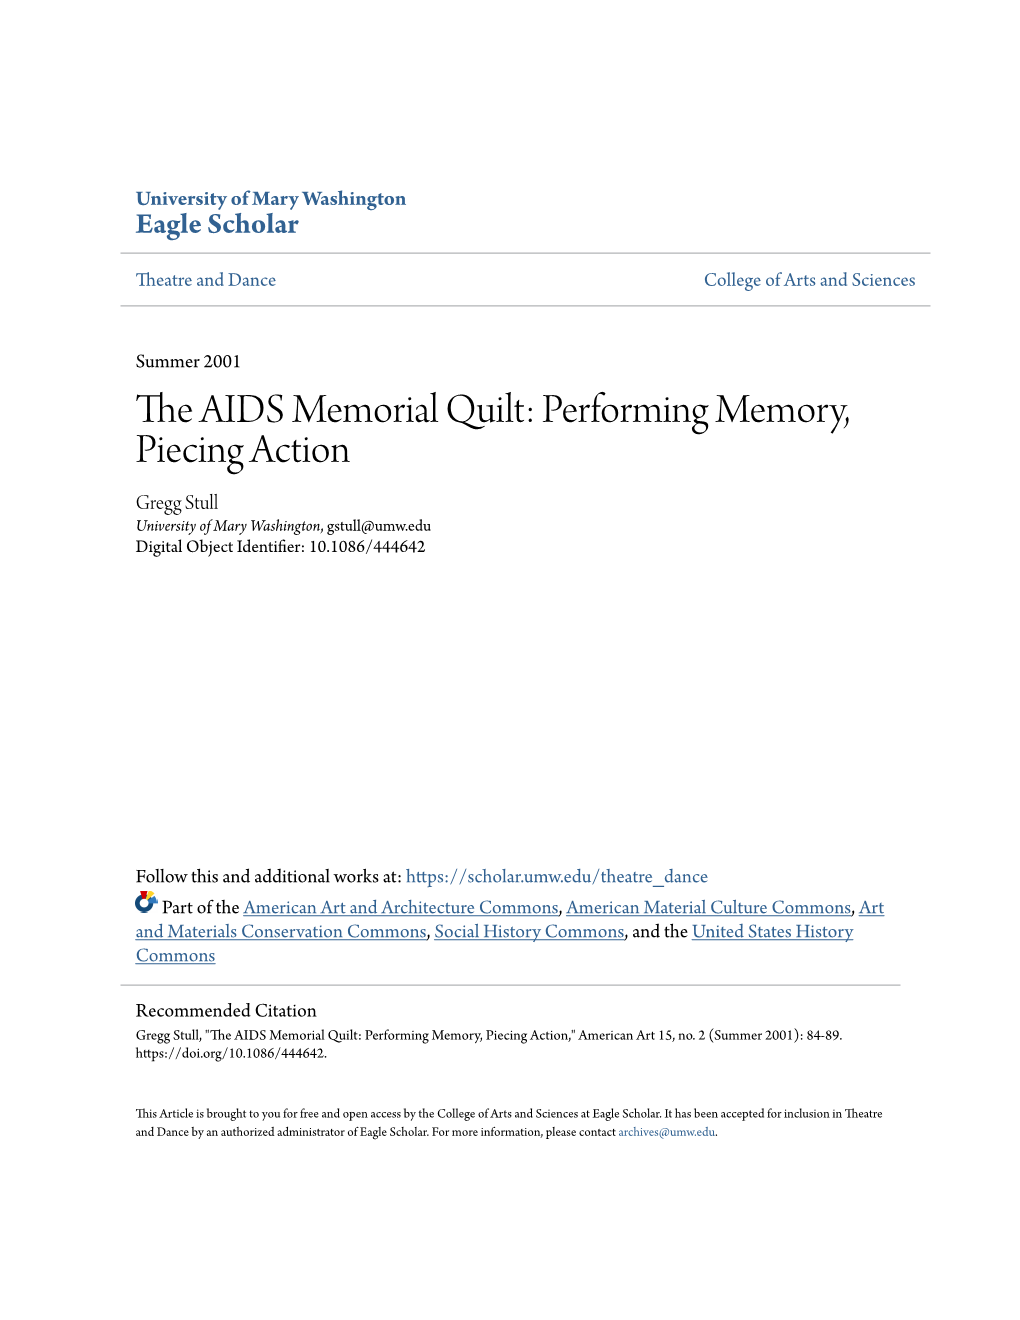 The AIDS Memorial Quilt: Performing Memory, Piecing Action," American Art 15, No